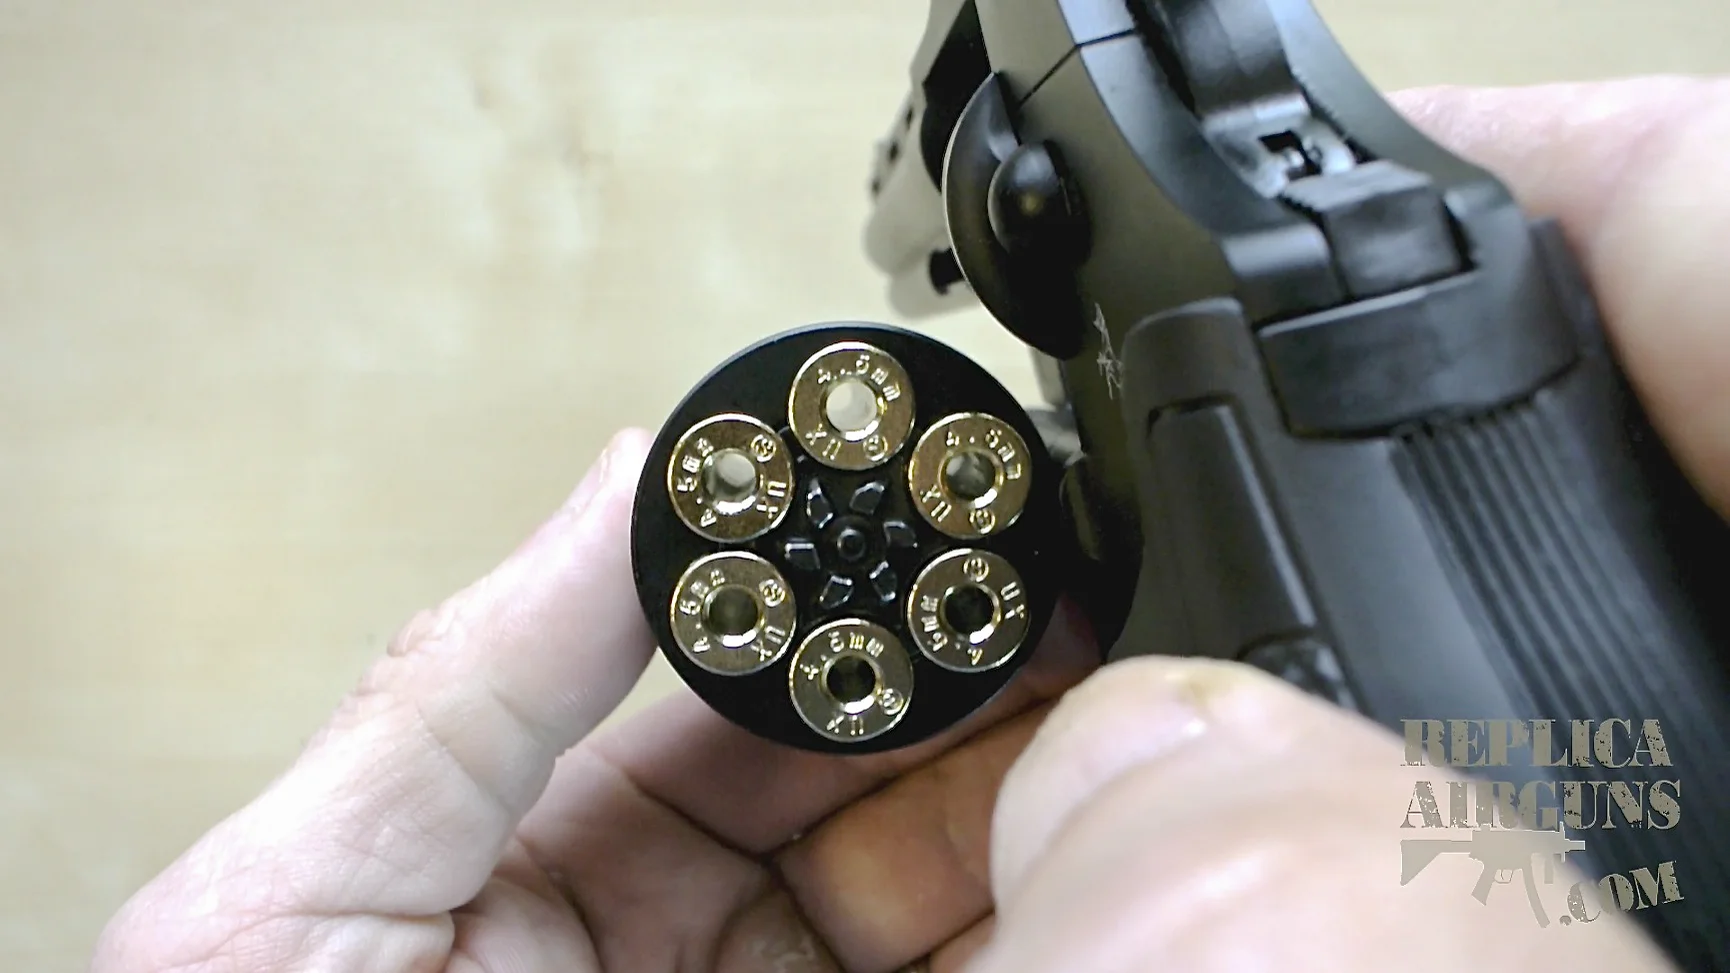 KWC 357 2.5 Inch CO2 Airsoft Revolver Table Top Review on Vimeo